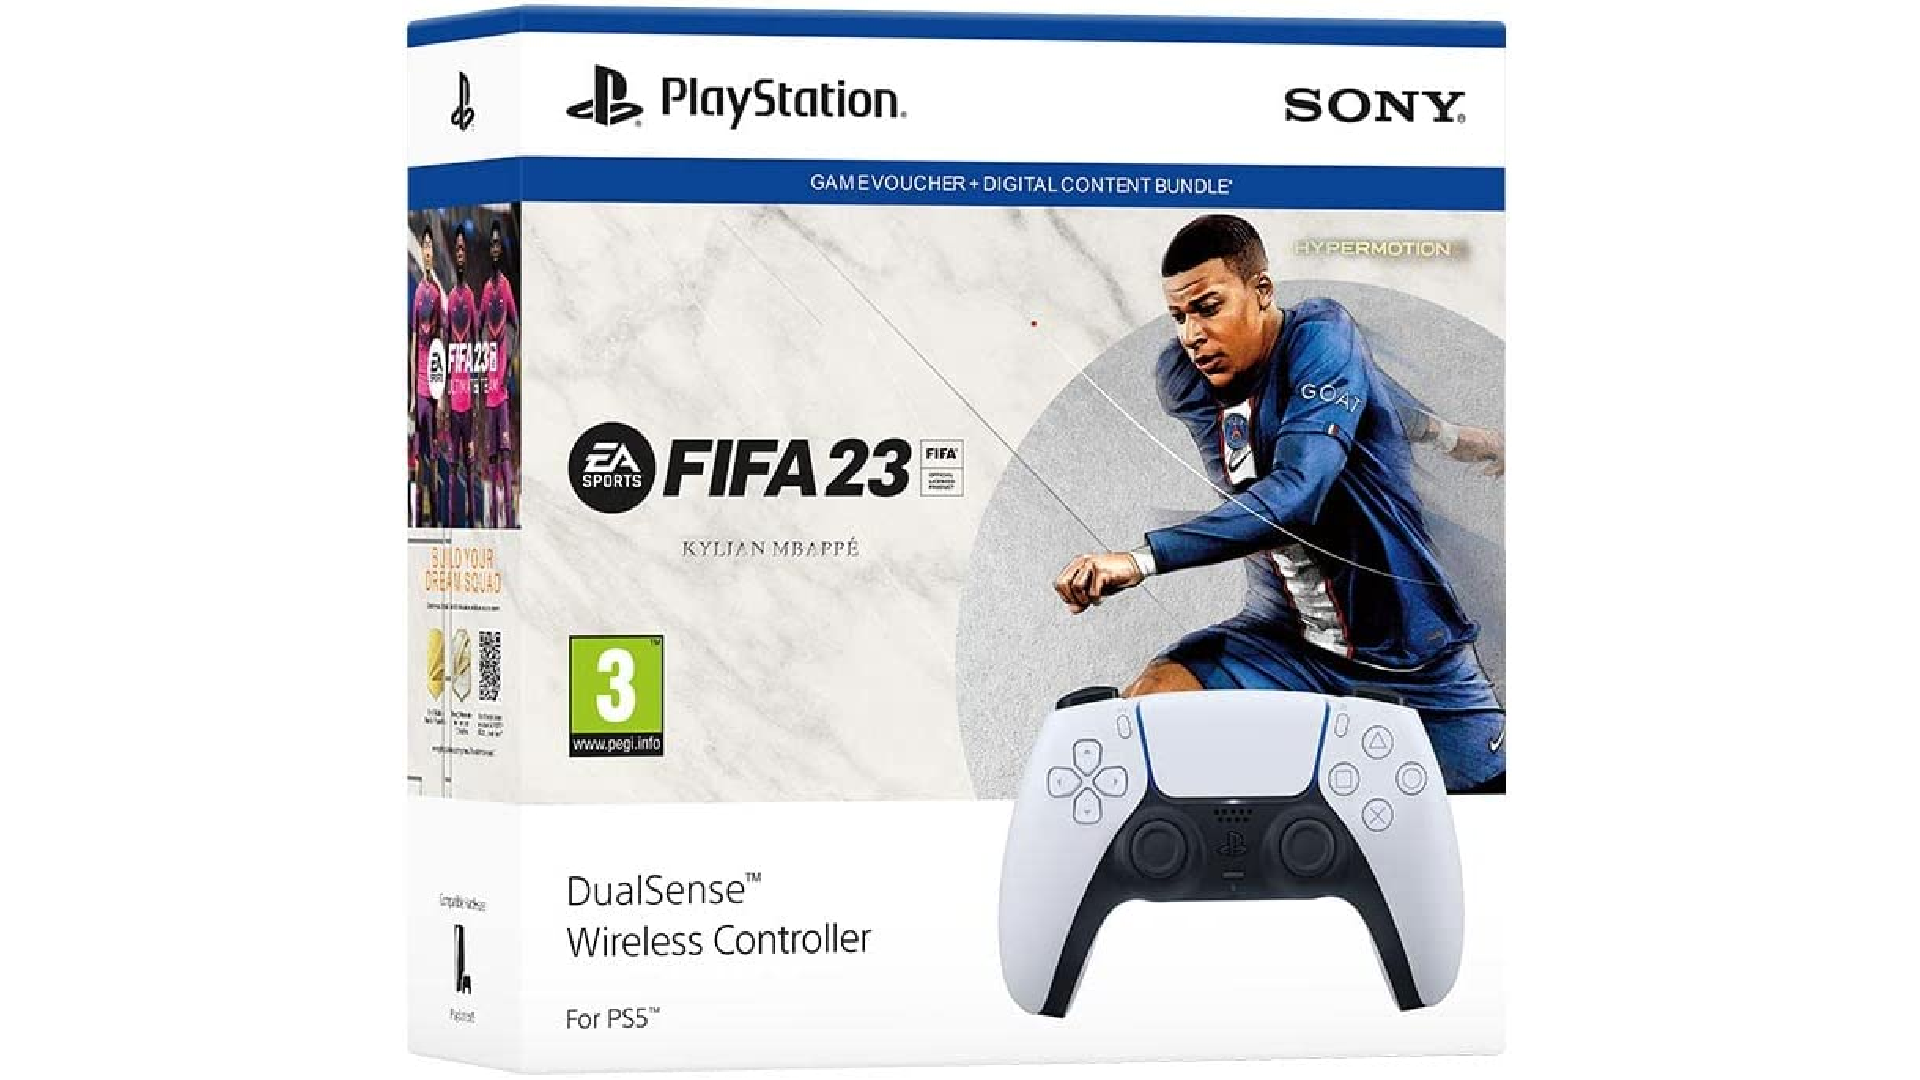 Image for Save £30 on this FIFA 23 and DualSense Controller bundle this Cyber Monday